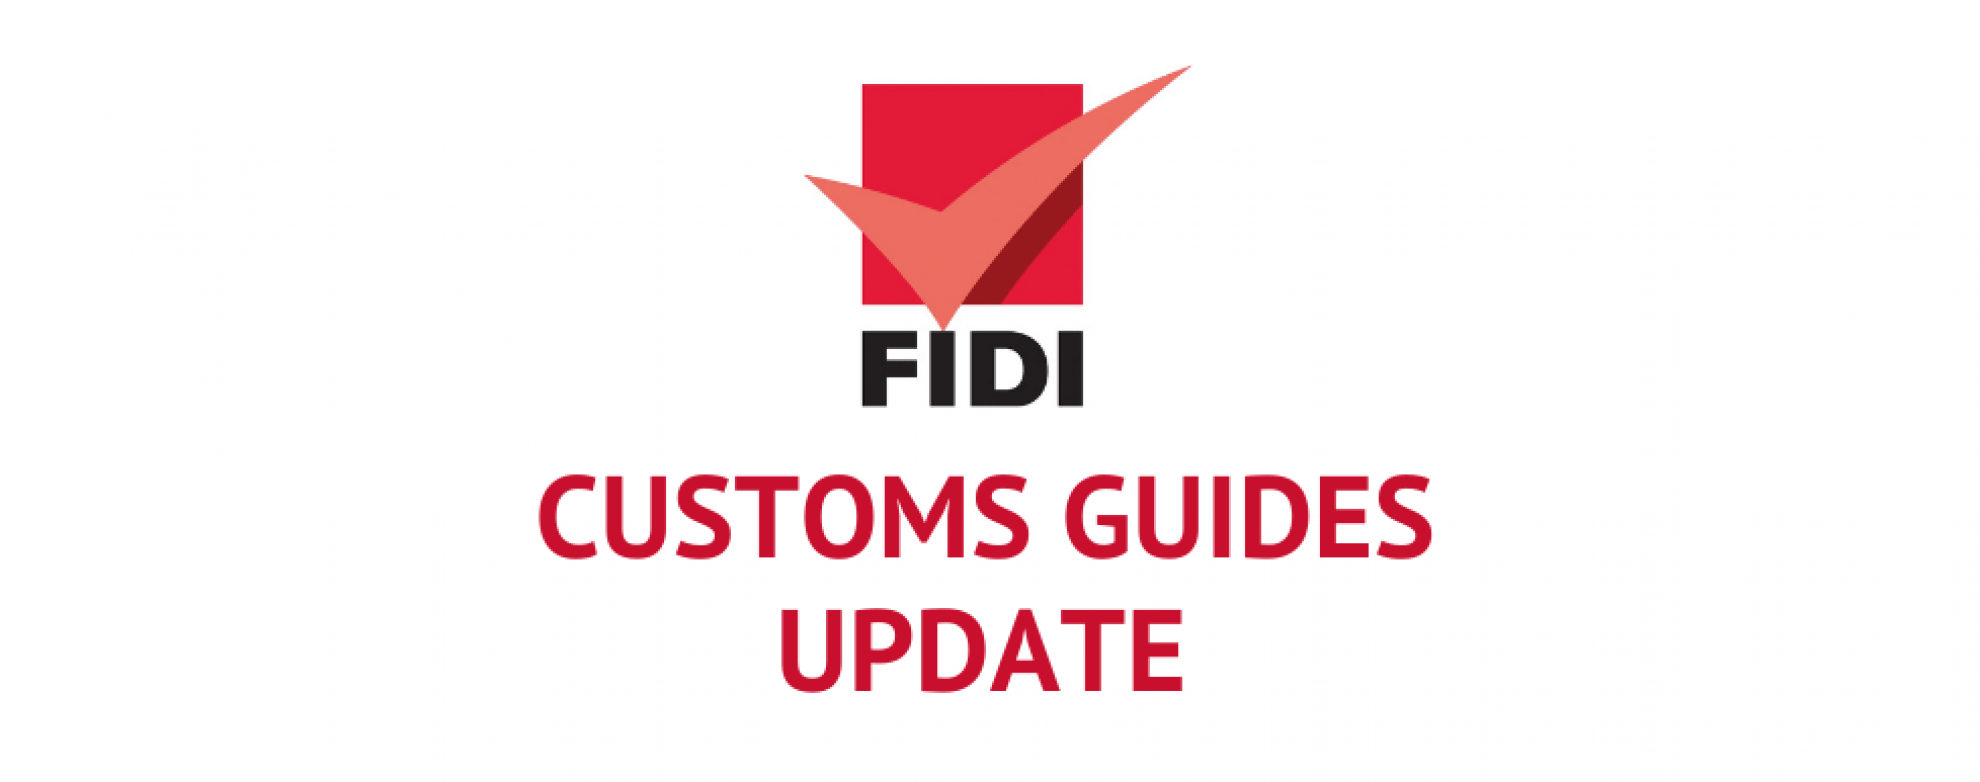 Belgium, Italy and Portugal's customs guides have been updated